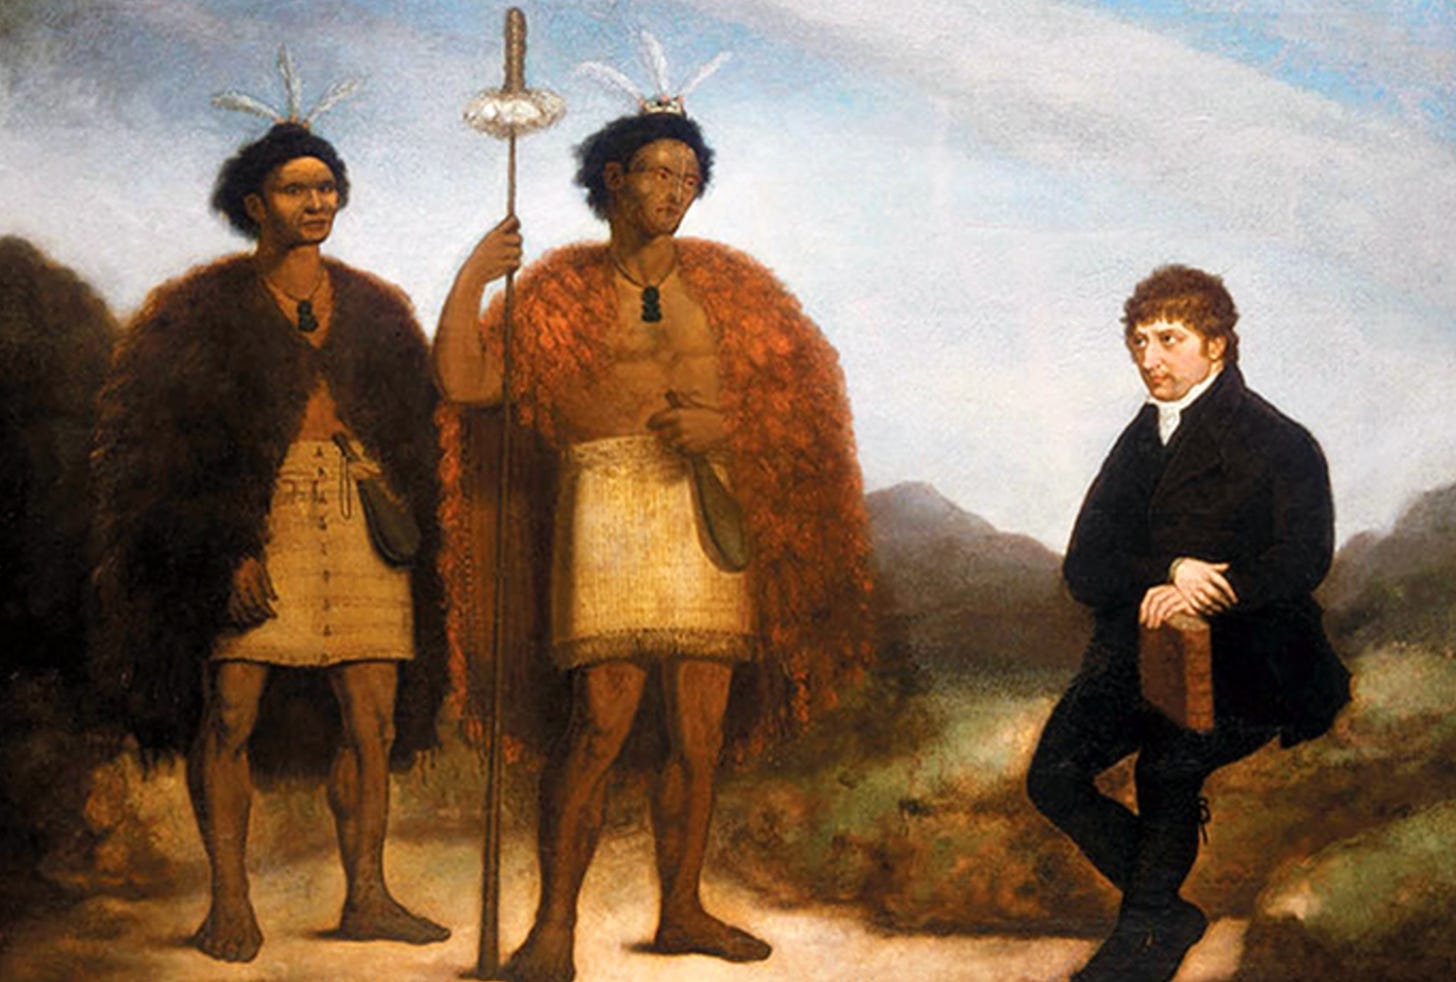 Illustration of Samuel Marsden with Maori - from the actual website